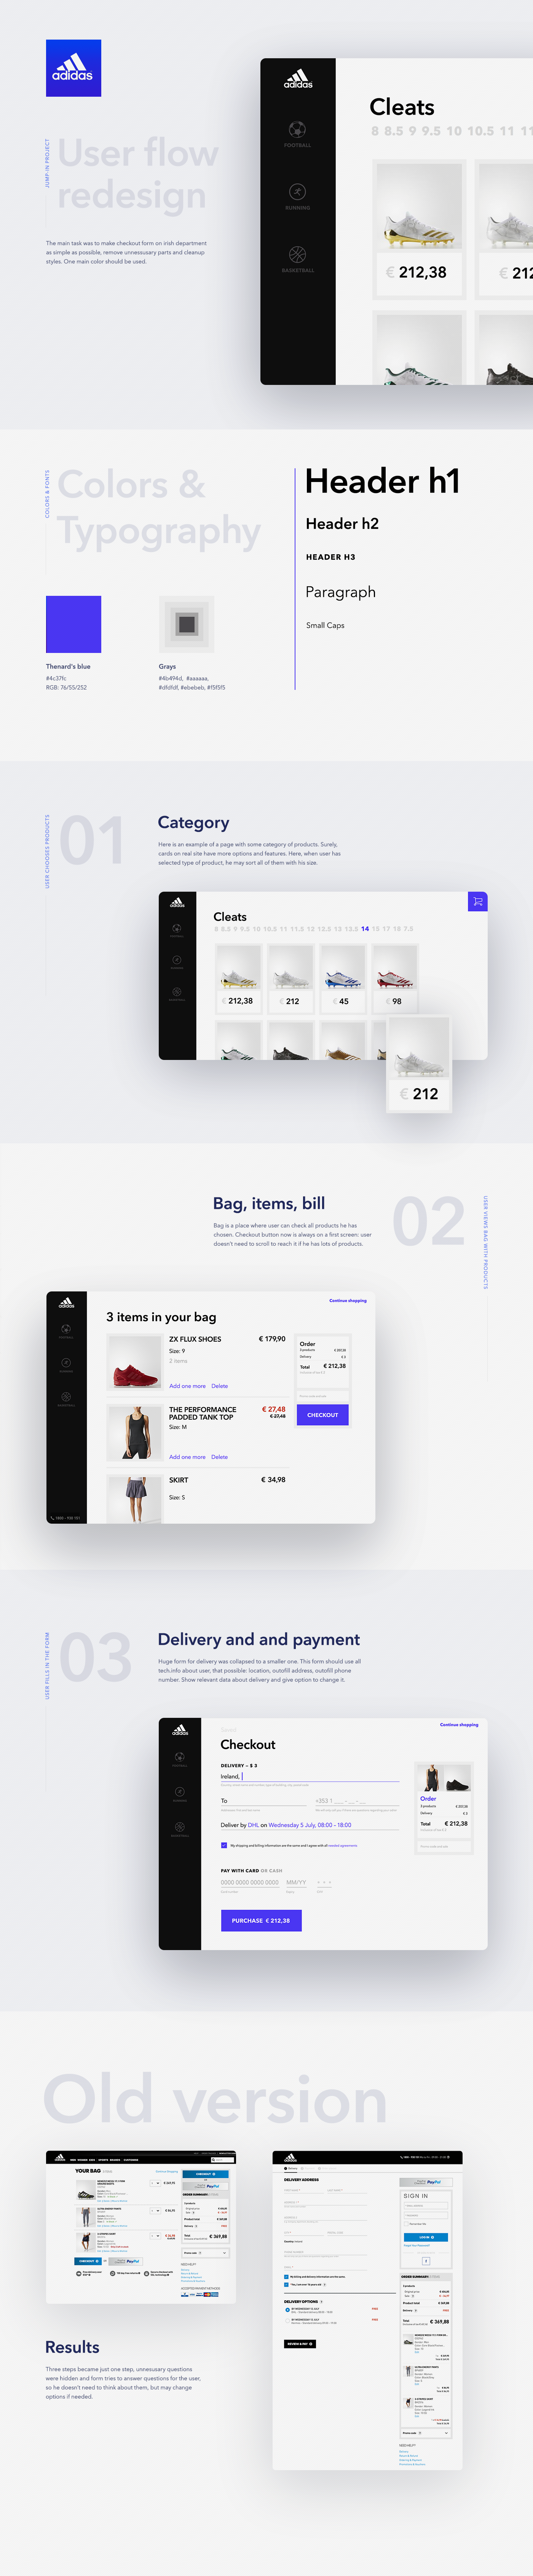 redesign sport adidas cart bag checkout product ux user flow simple